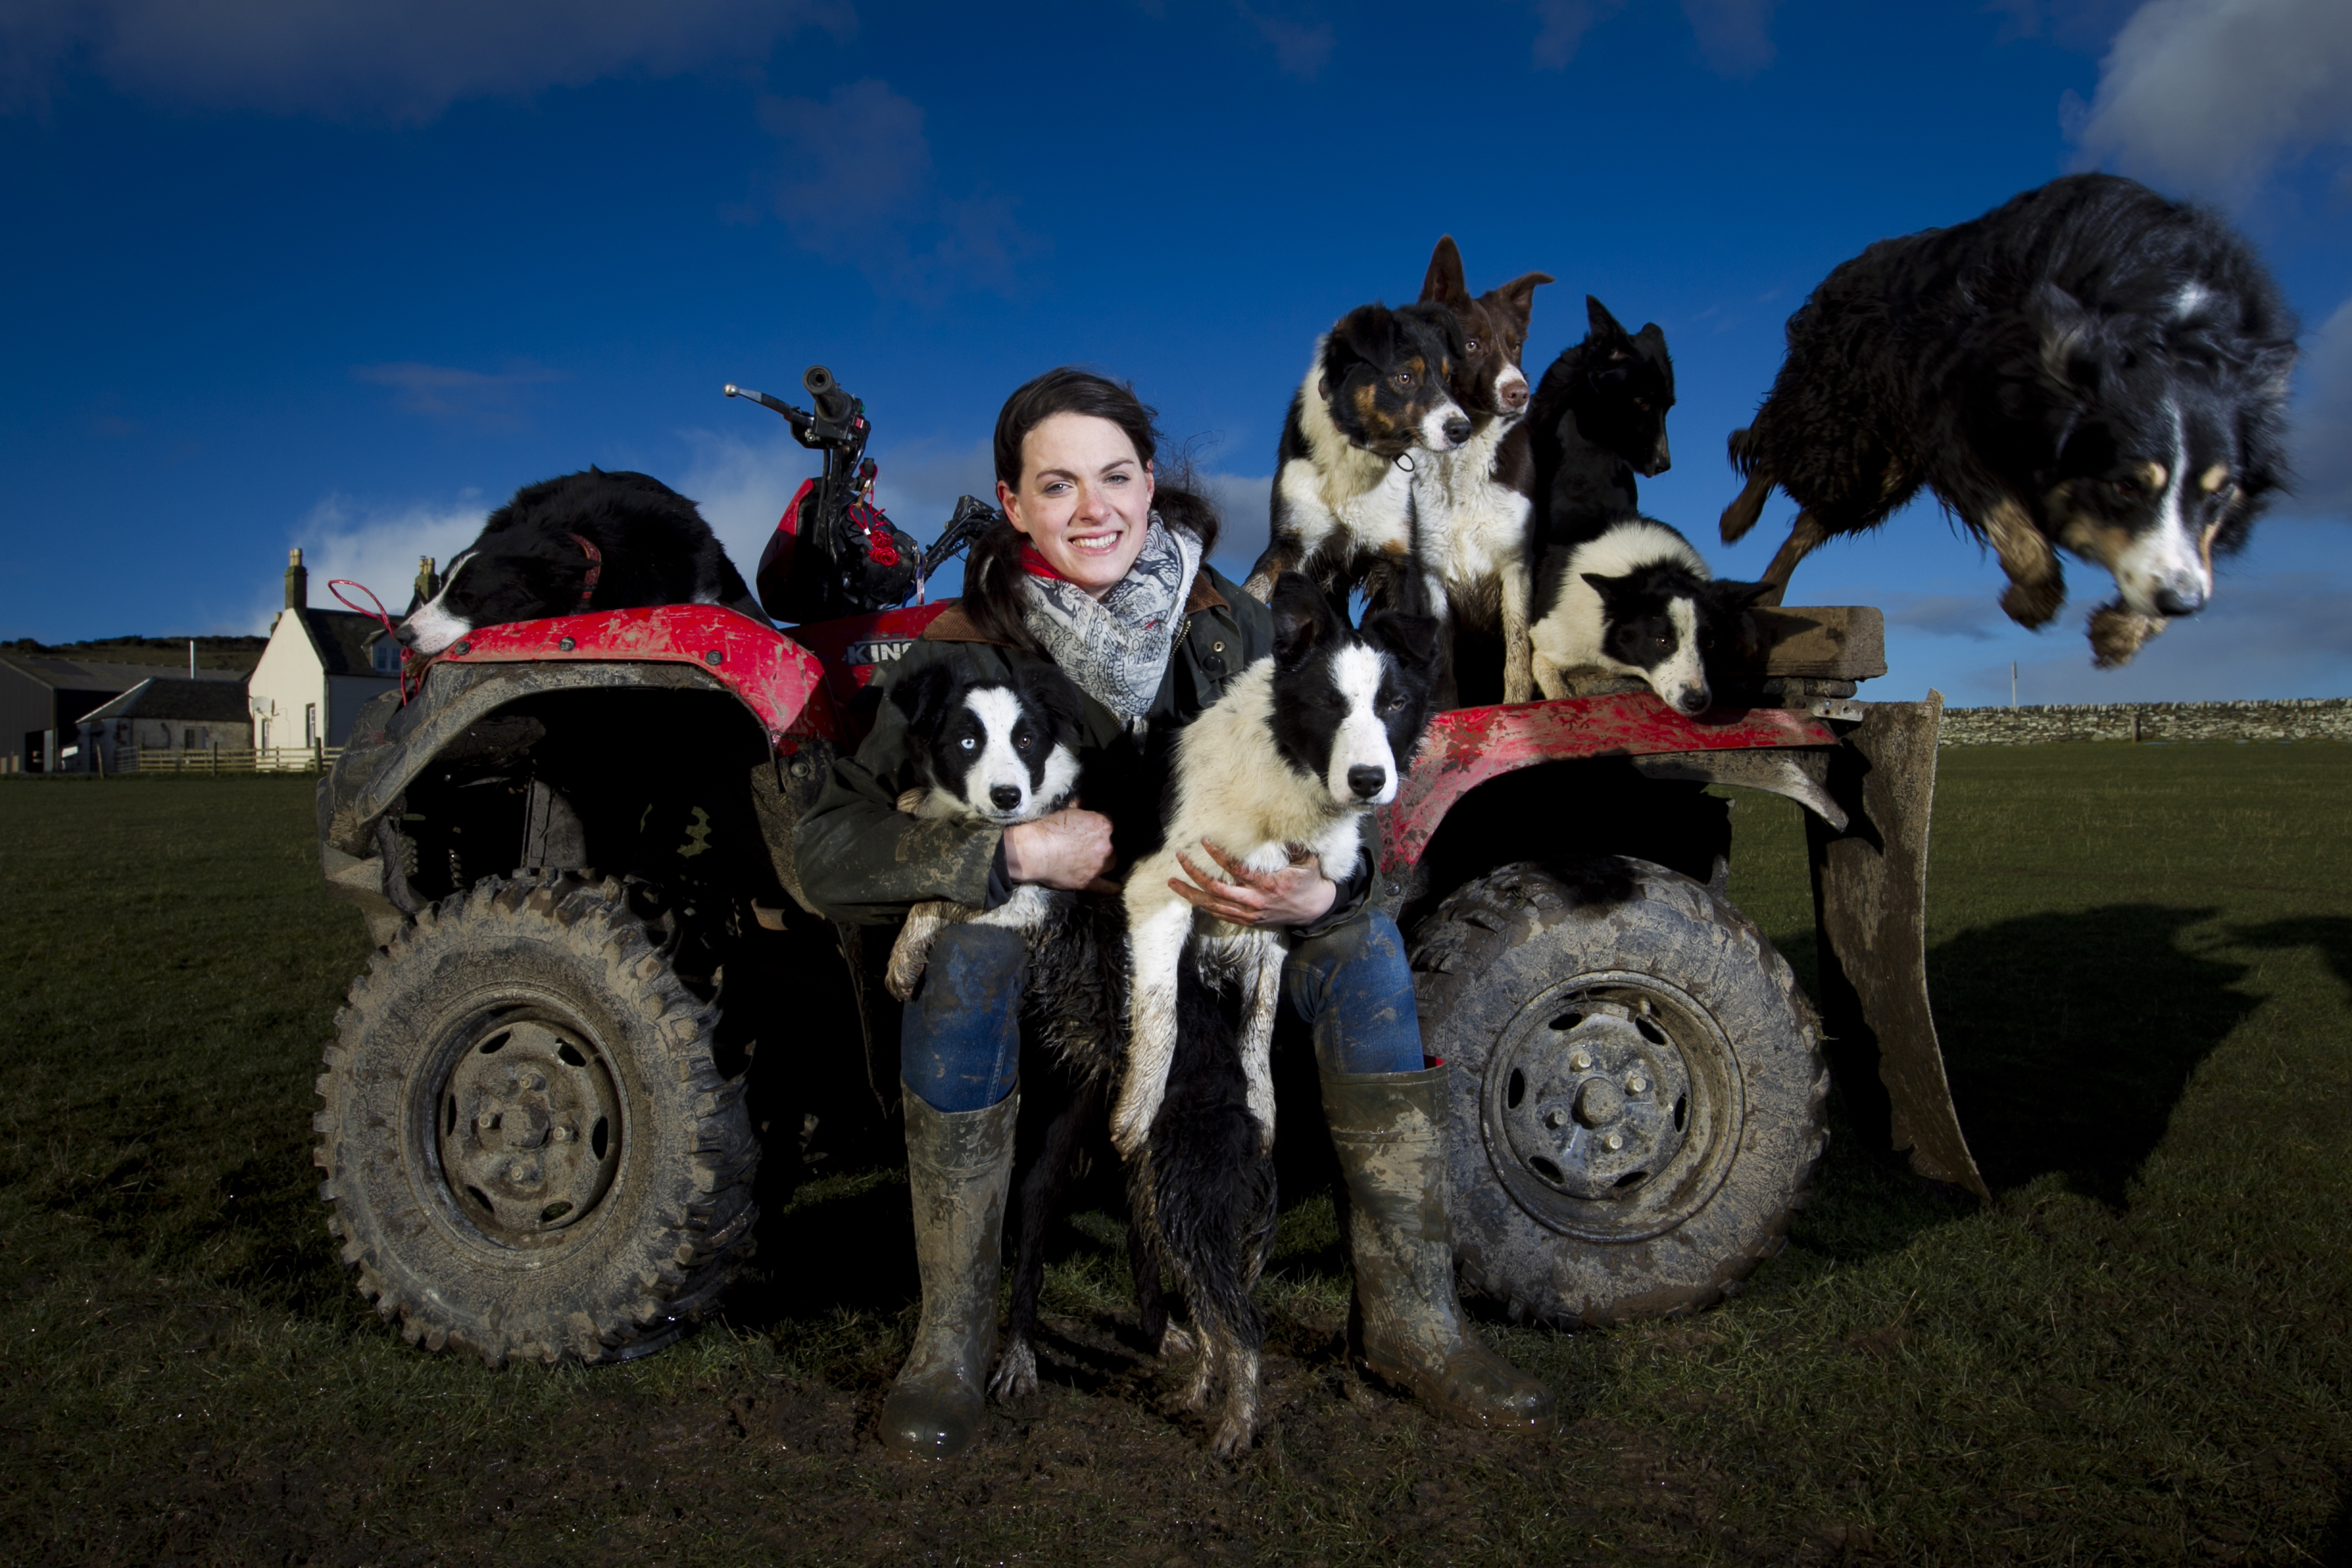 Lisa Gast, who breeds and trains sheepdogs, and puppy sheepdogs on the Isle of Bute. (Andrew Cawley)